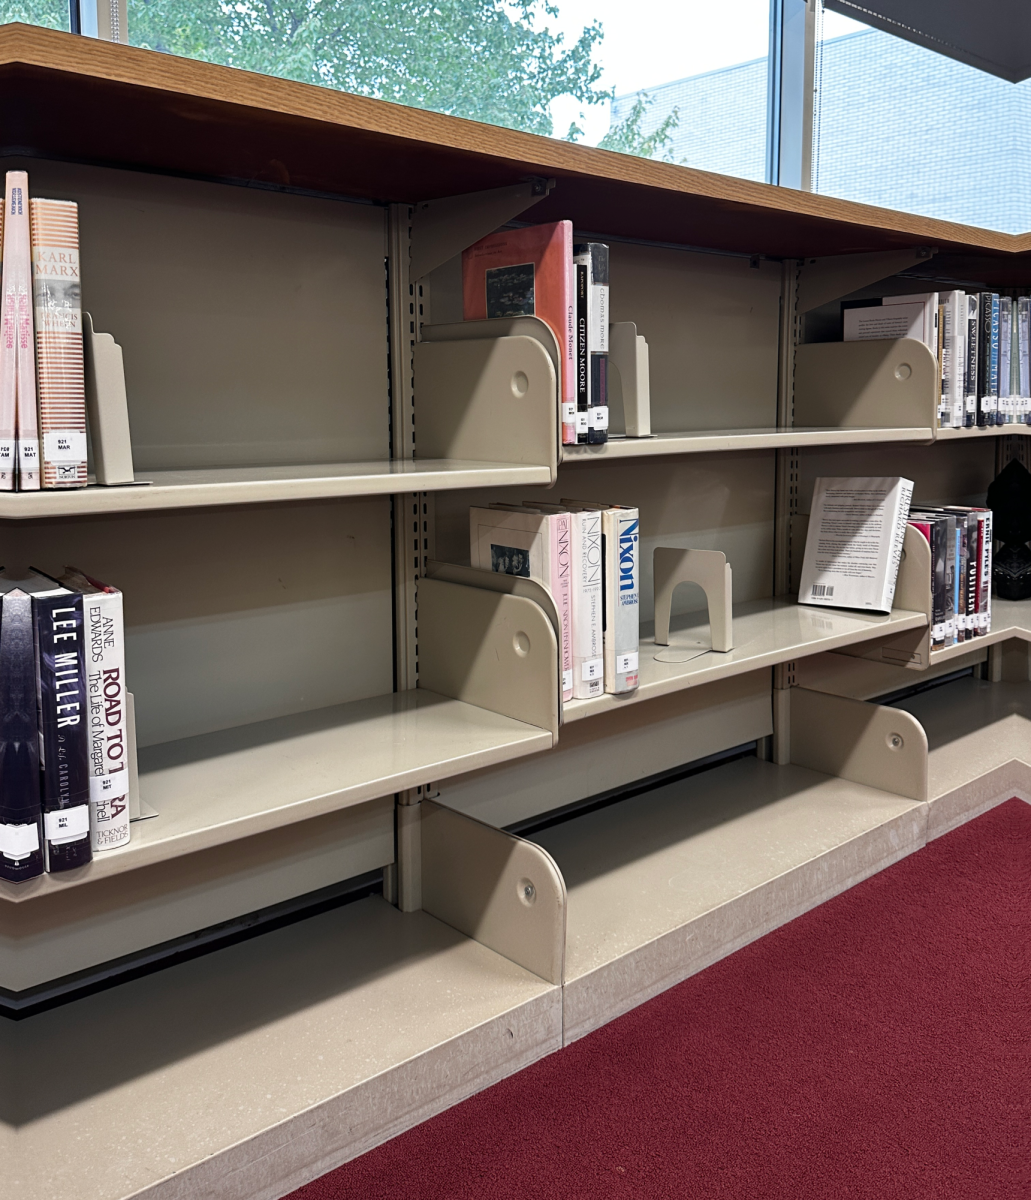 Library+shelves+are+looking+rather+empty+across+the+state+as+books+are+removed+after+being+deemed+inappropriate+by+the+new+law